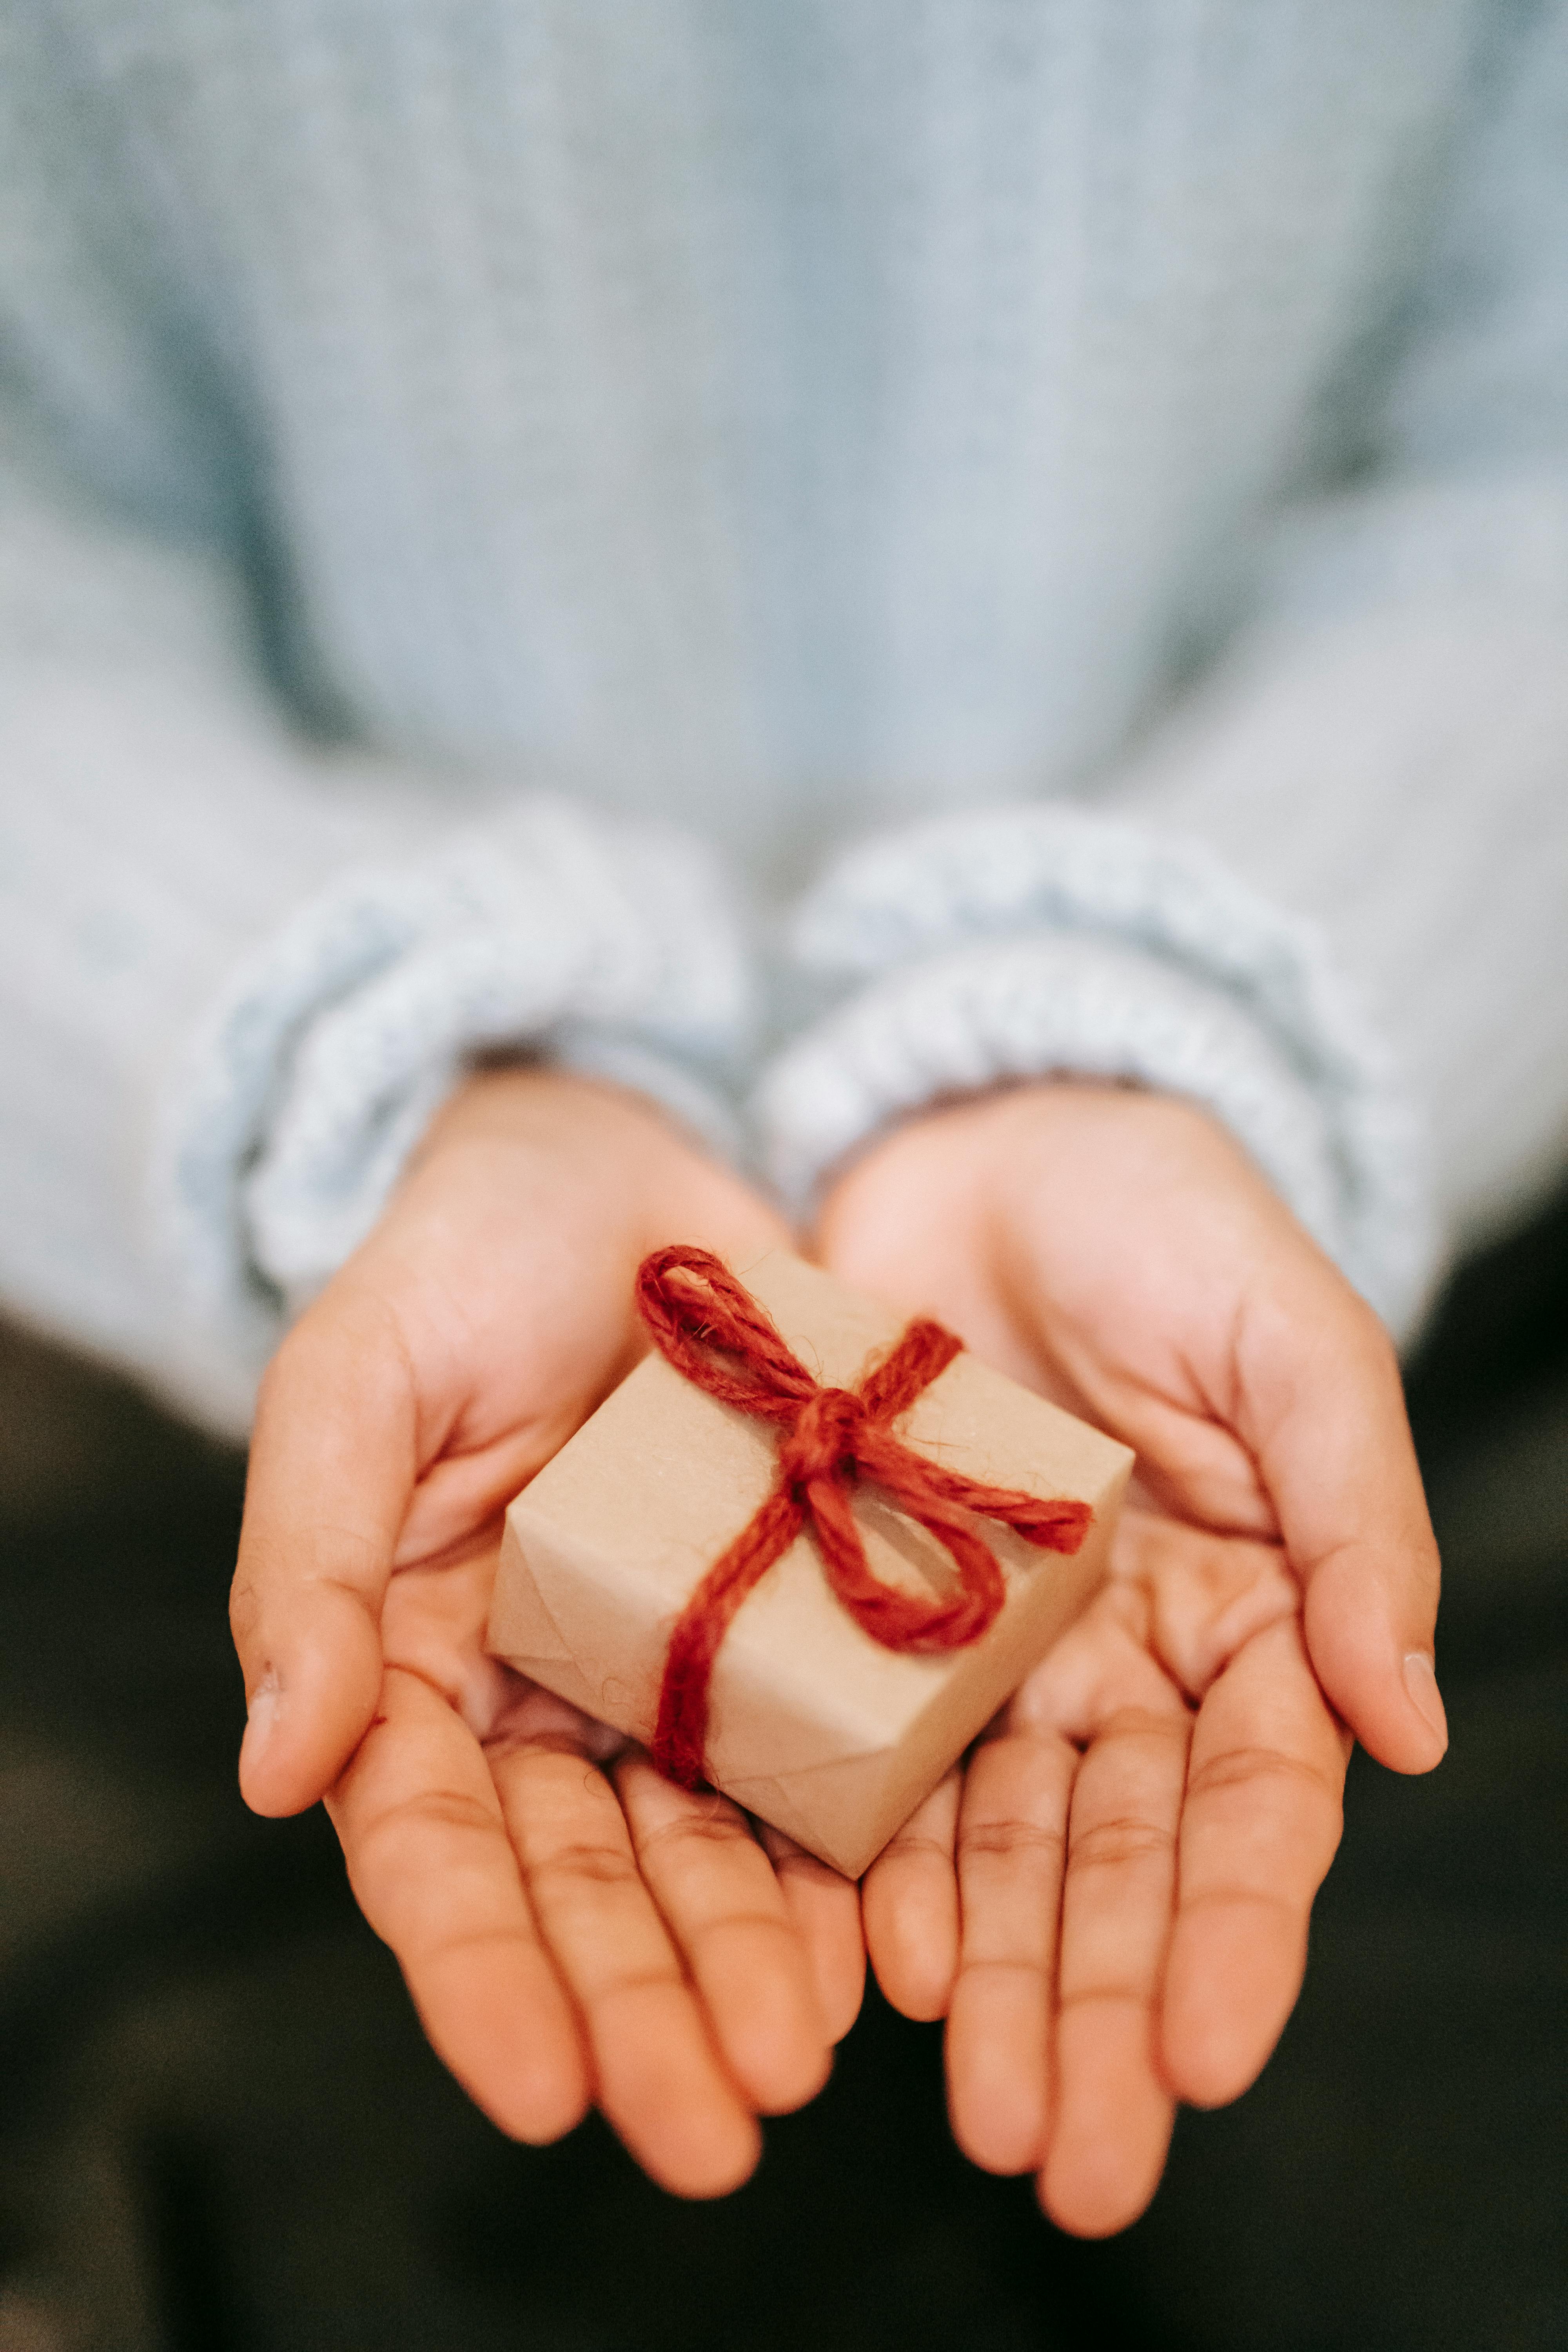 A woman holding a small wrapped box | Source: Pexels